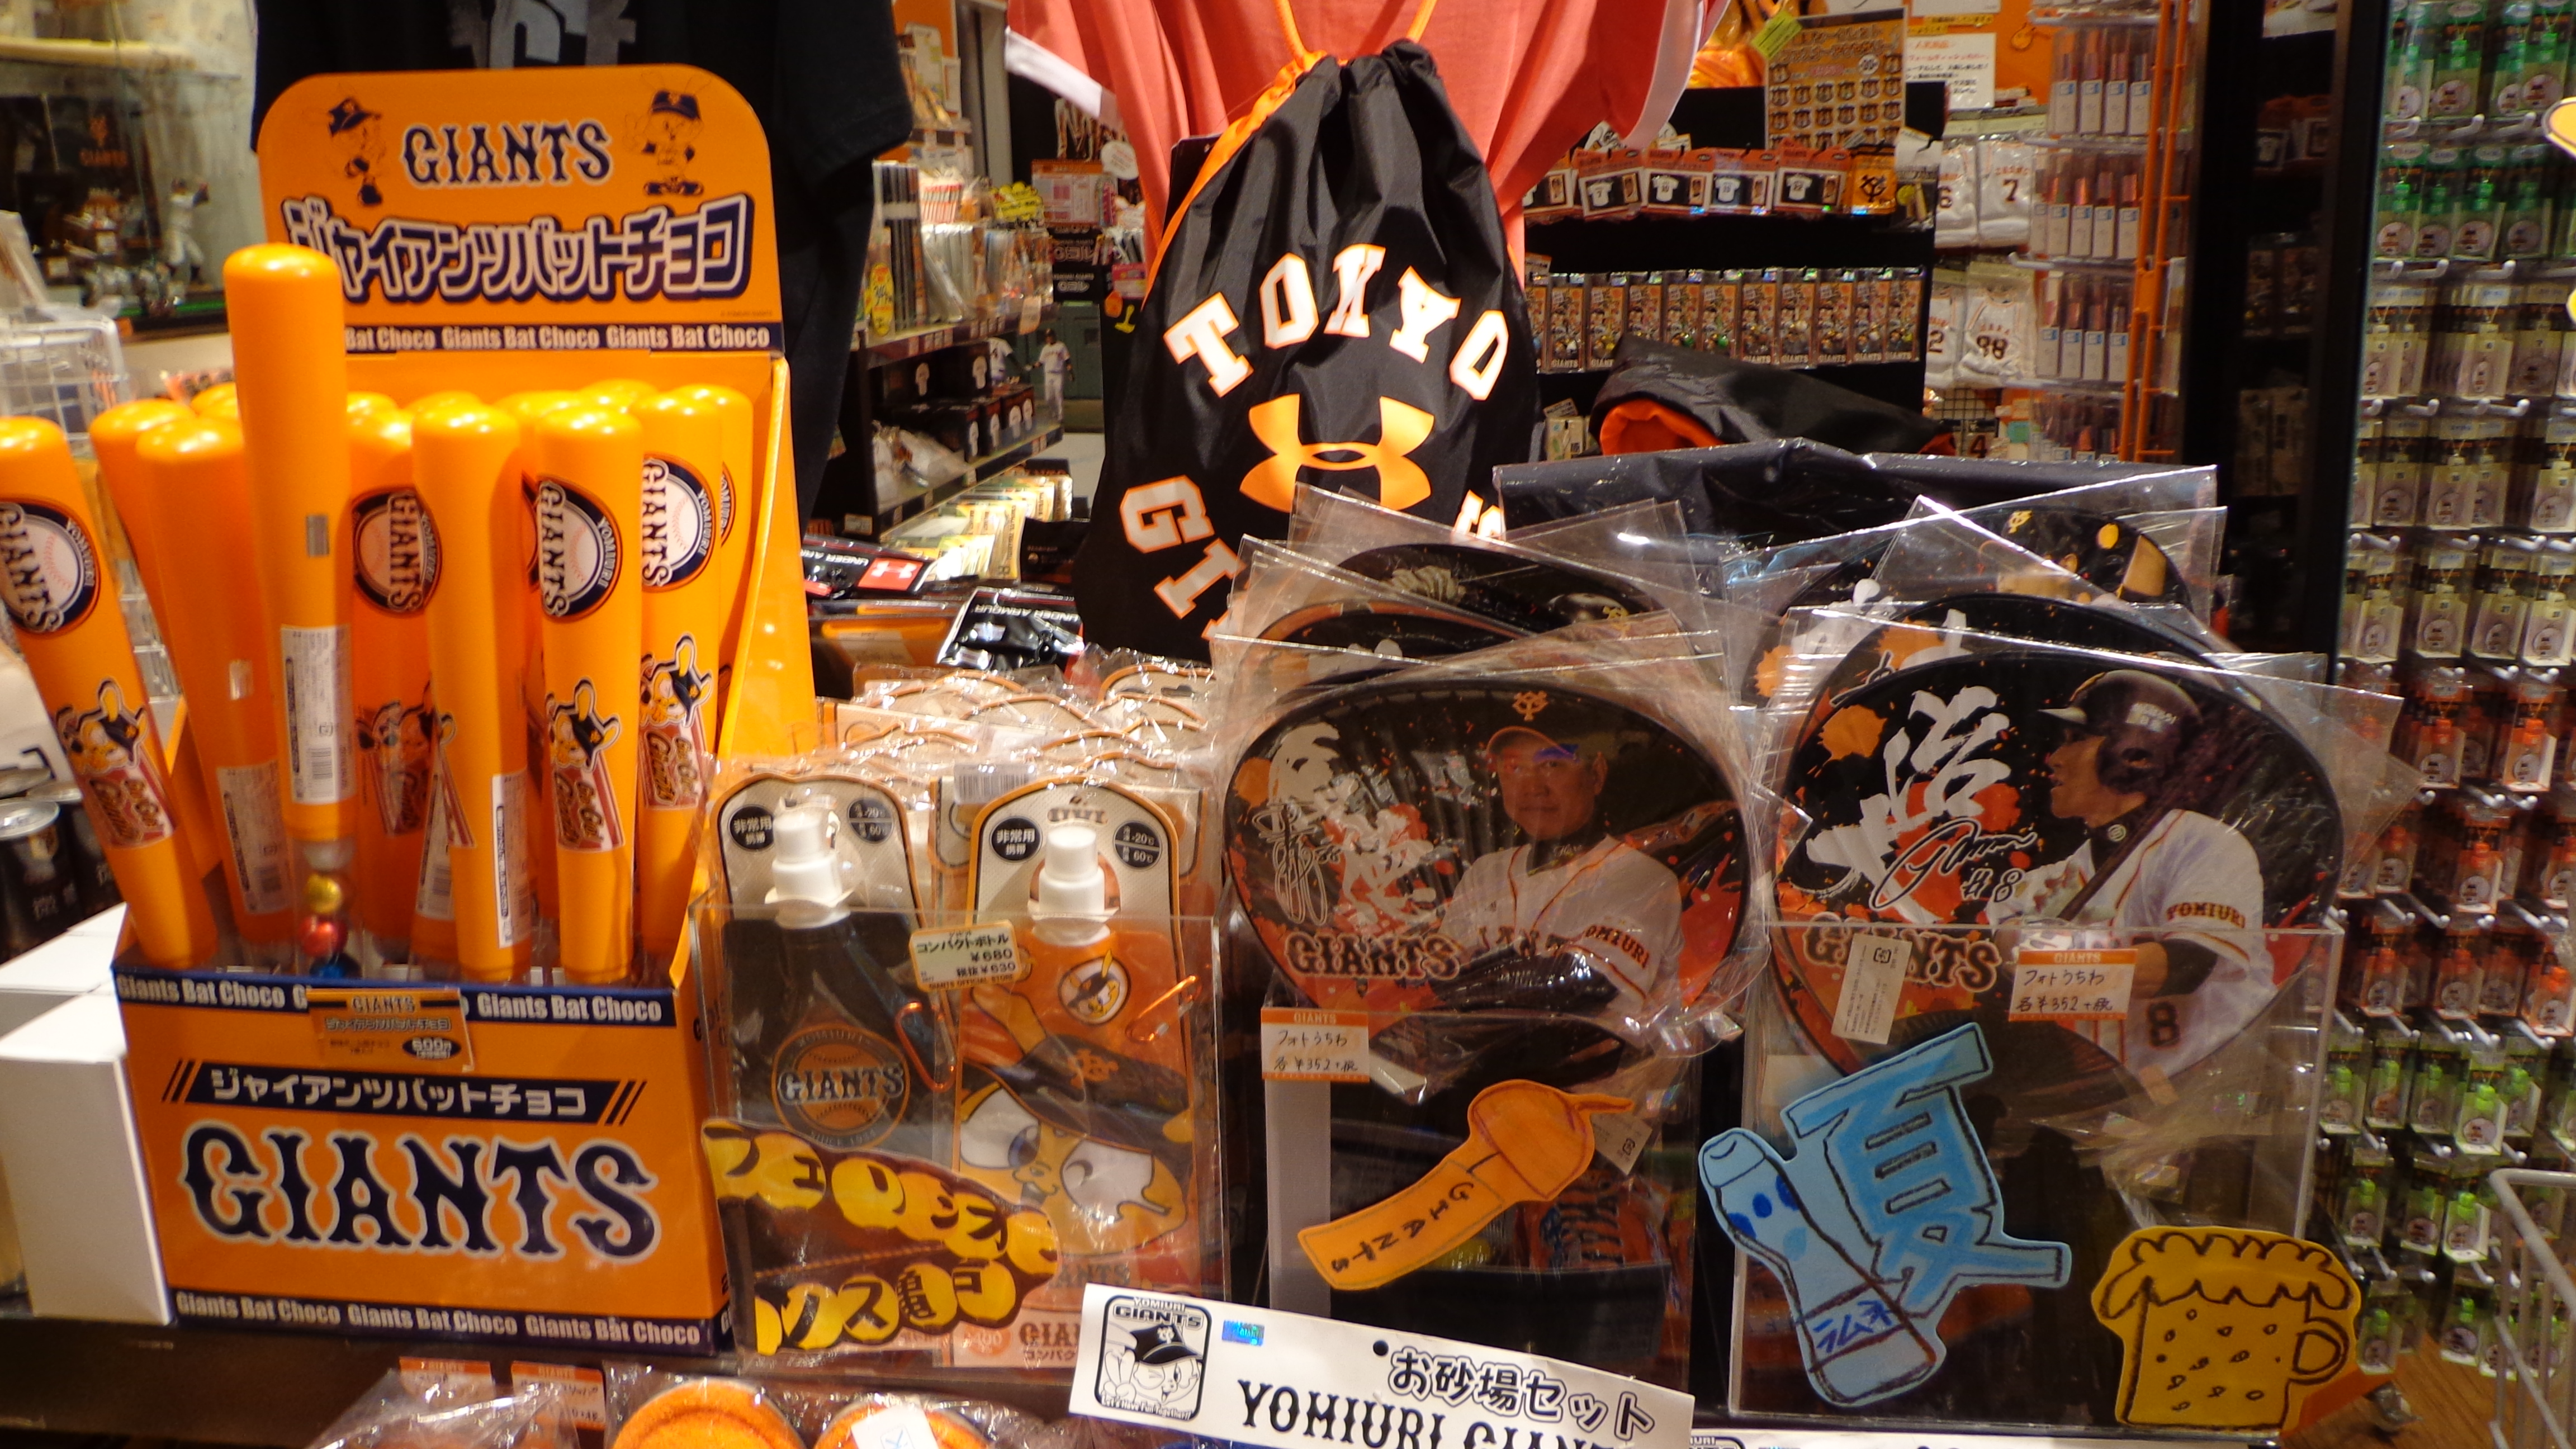 GIANTS OFFICIAL STORE” Tokyo Skytree Town